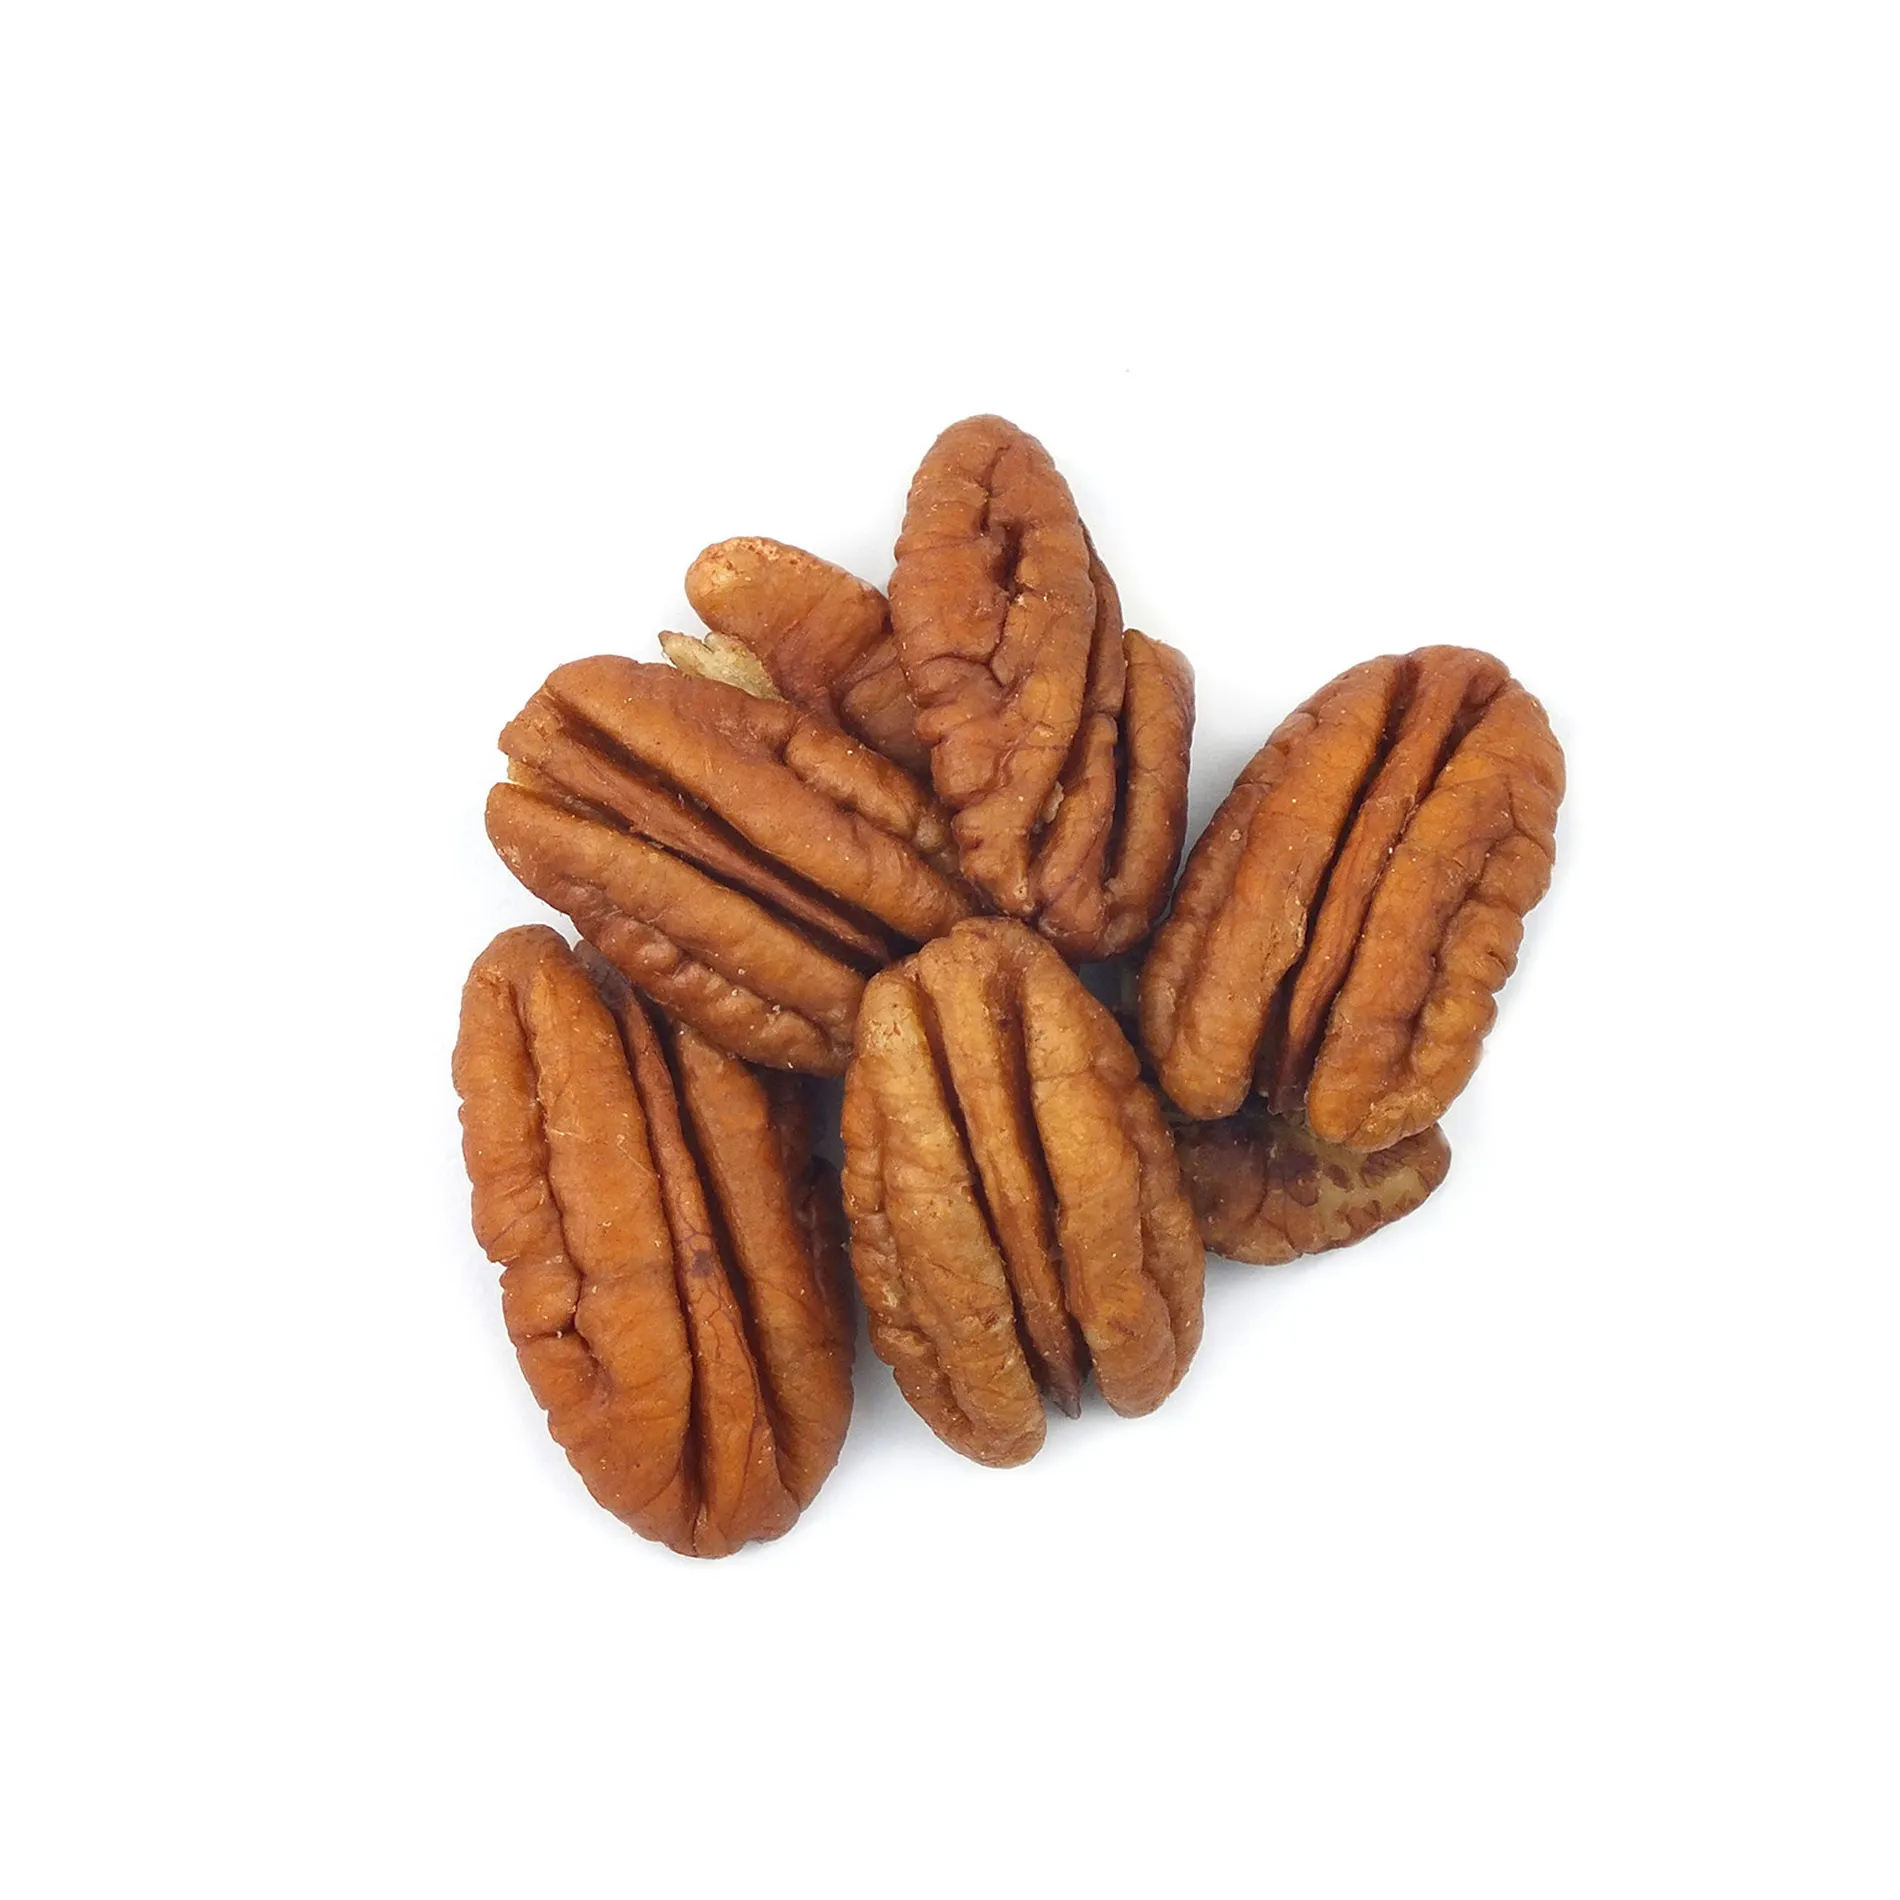 Cheap sales Pecan Nuts/Healthy Organic Roasted Pecan Nuts for sale /High Quality Pecan Nut Roasted Salted